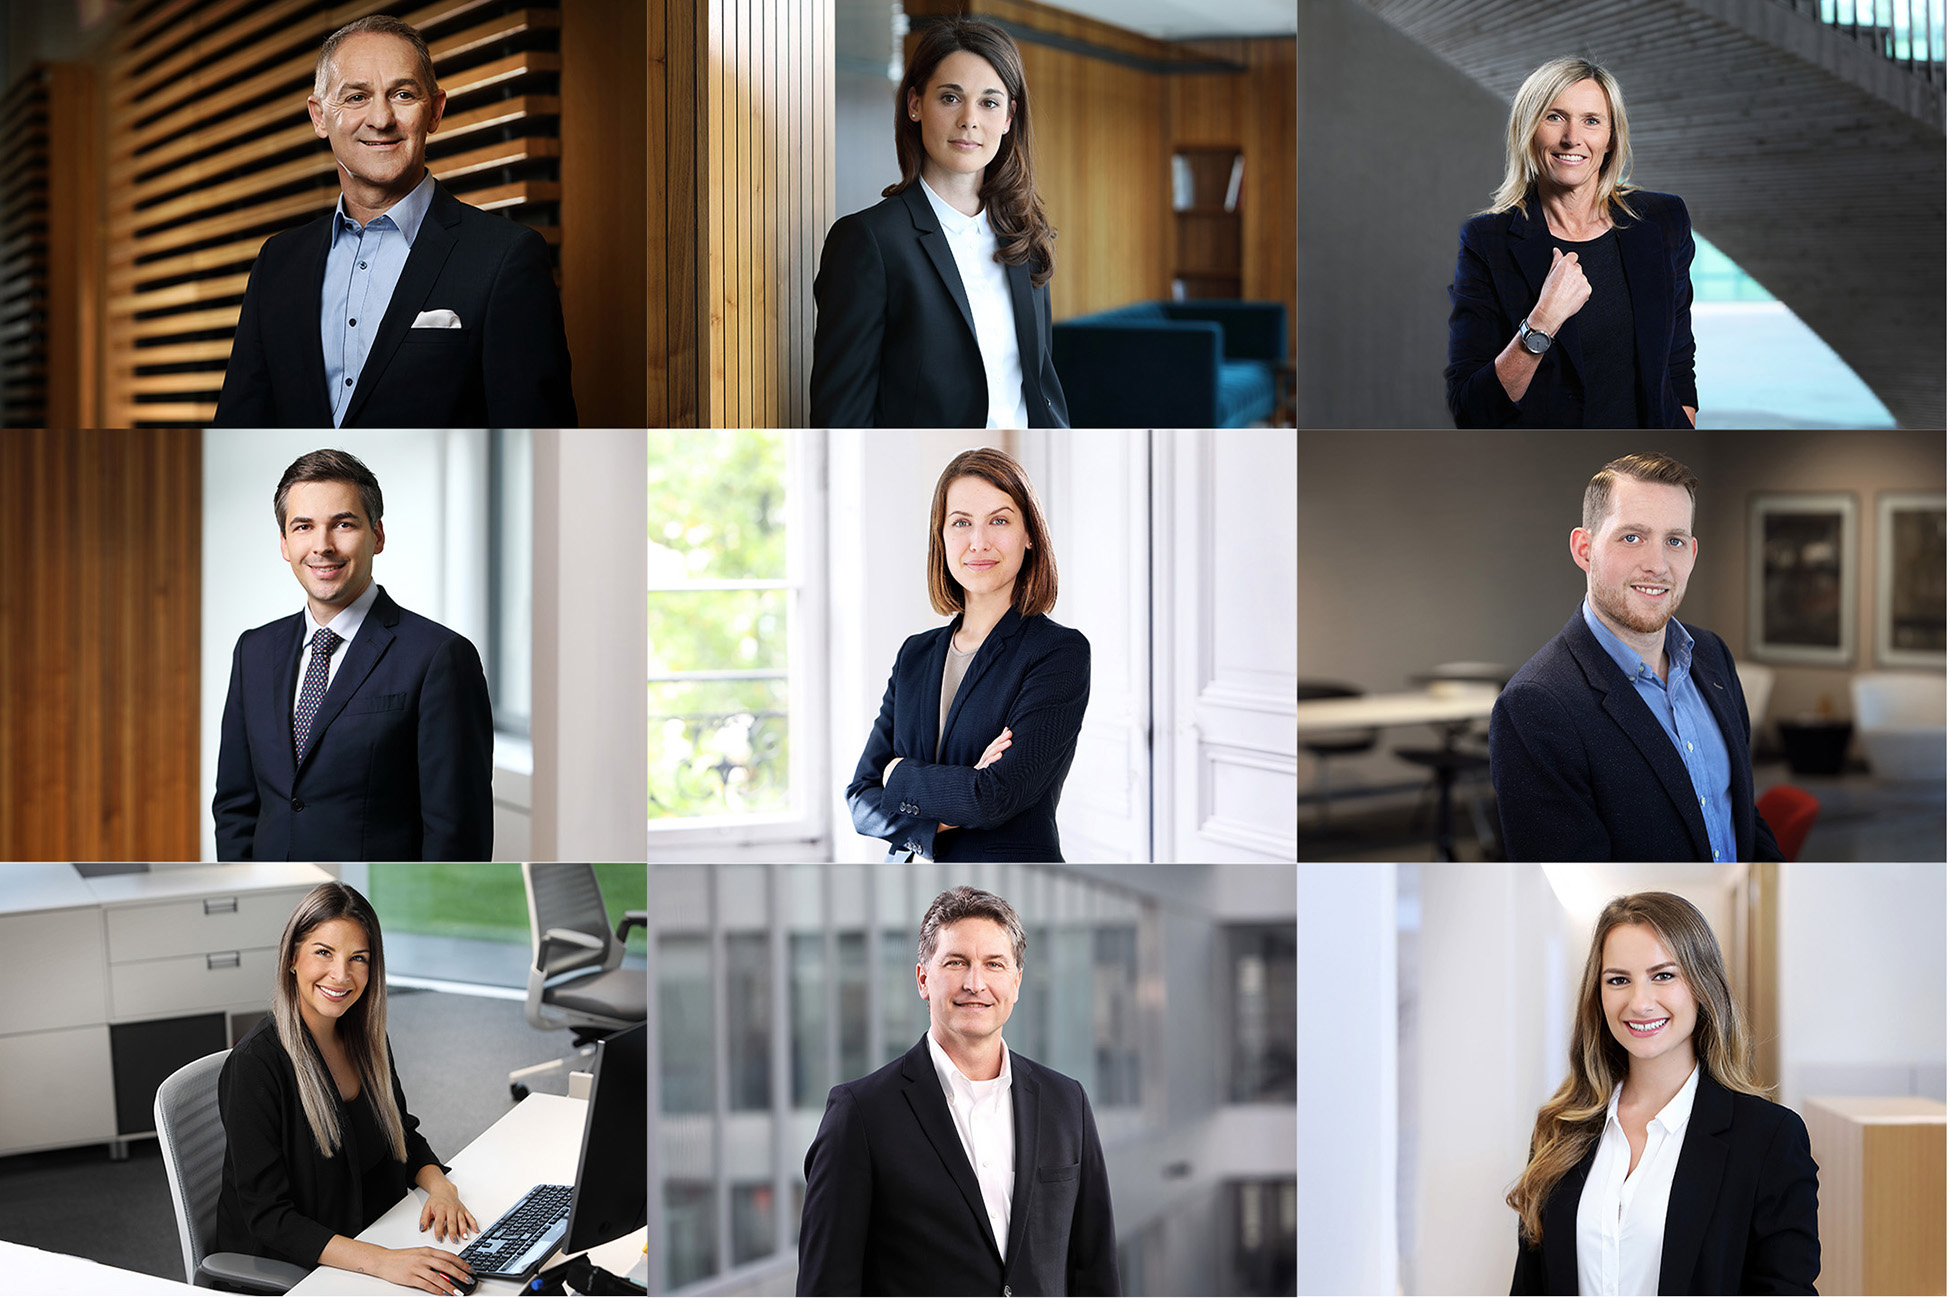 Justin Hession Photography works closely within the Swiss corporate industry creating portraits and group portraits of teams in their natural work environments.